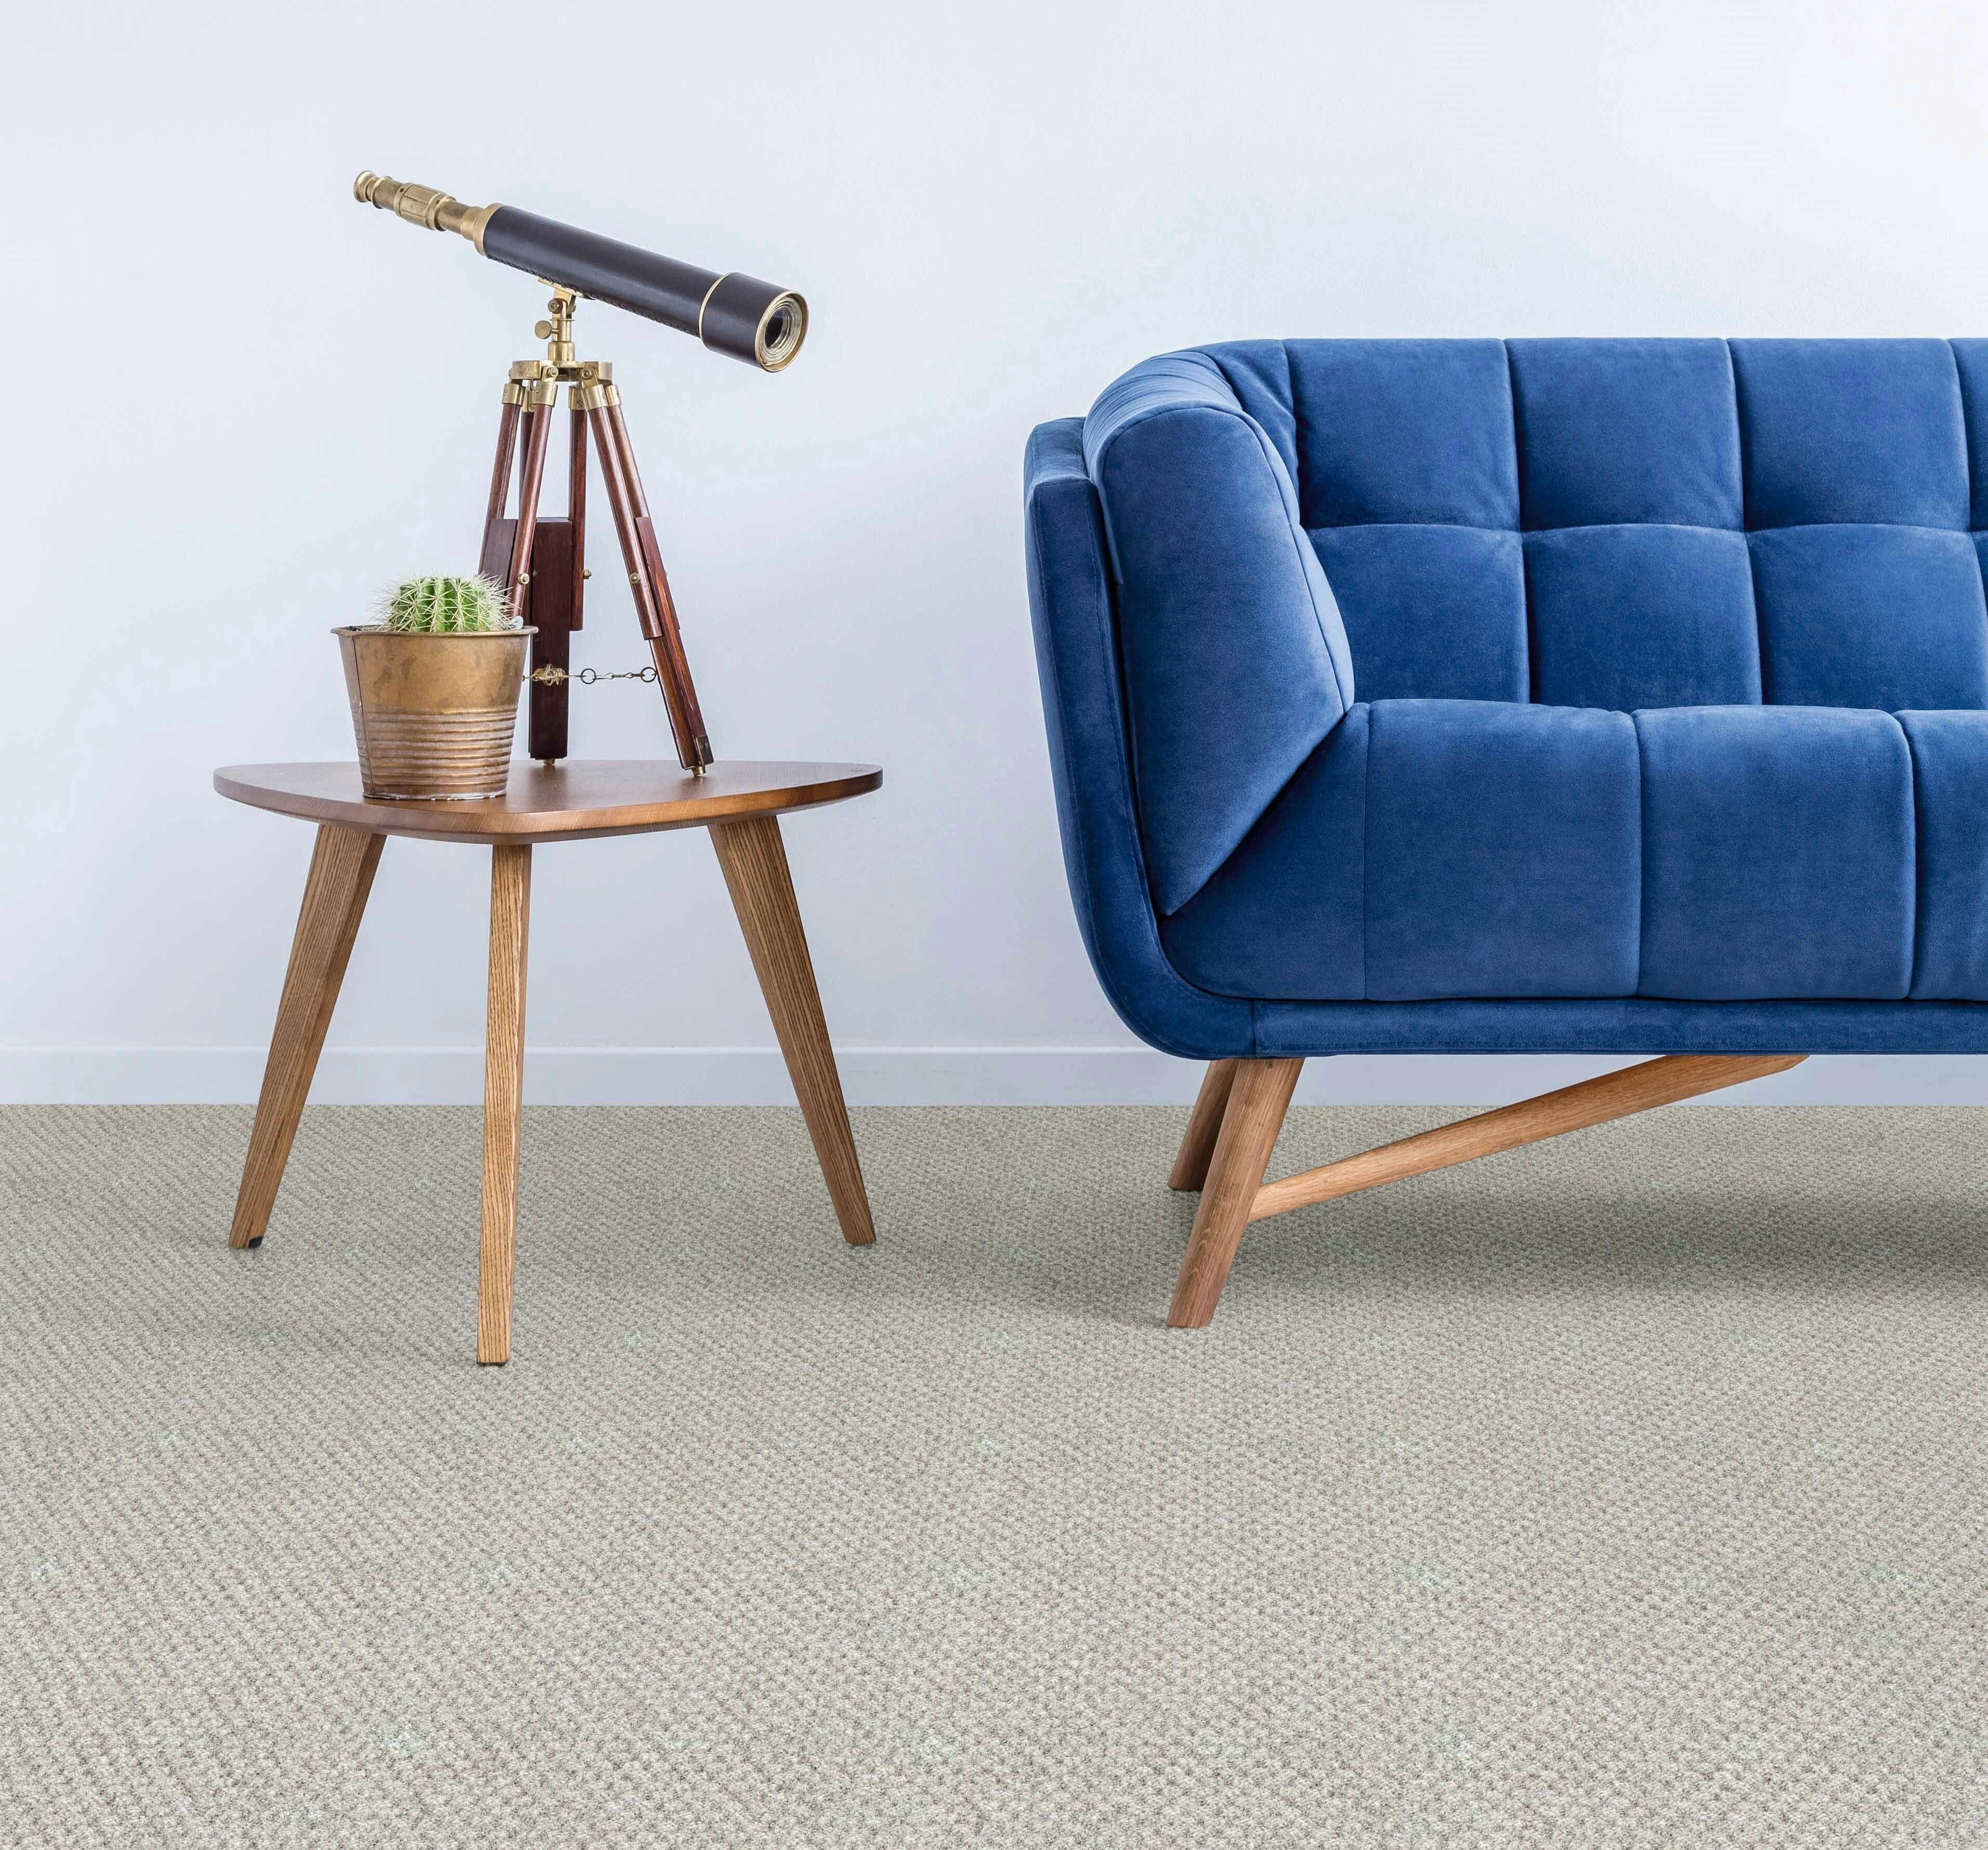 Marlow Loop Carpet finishes off any room